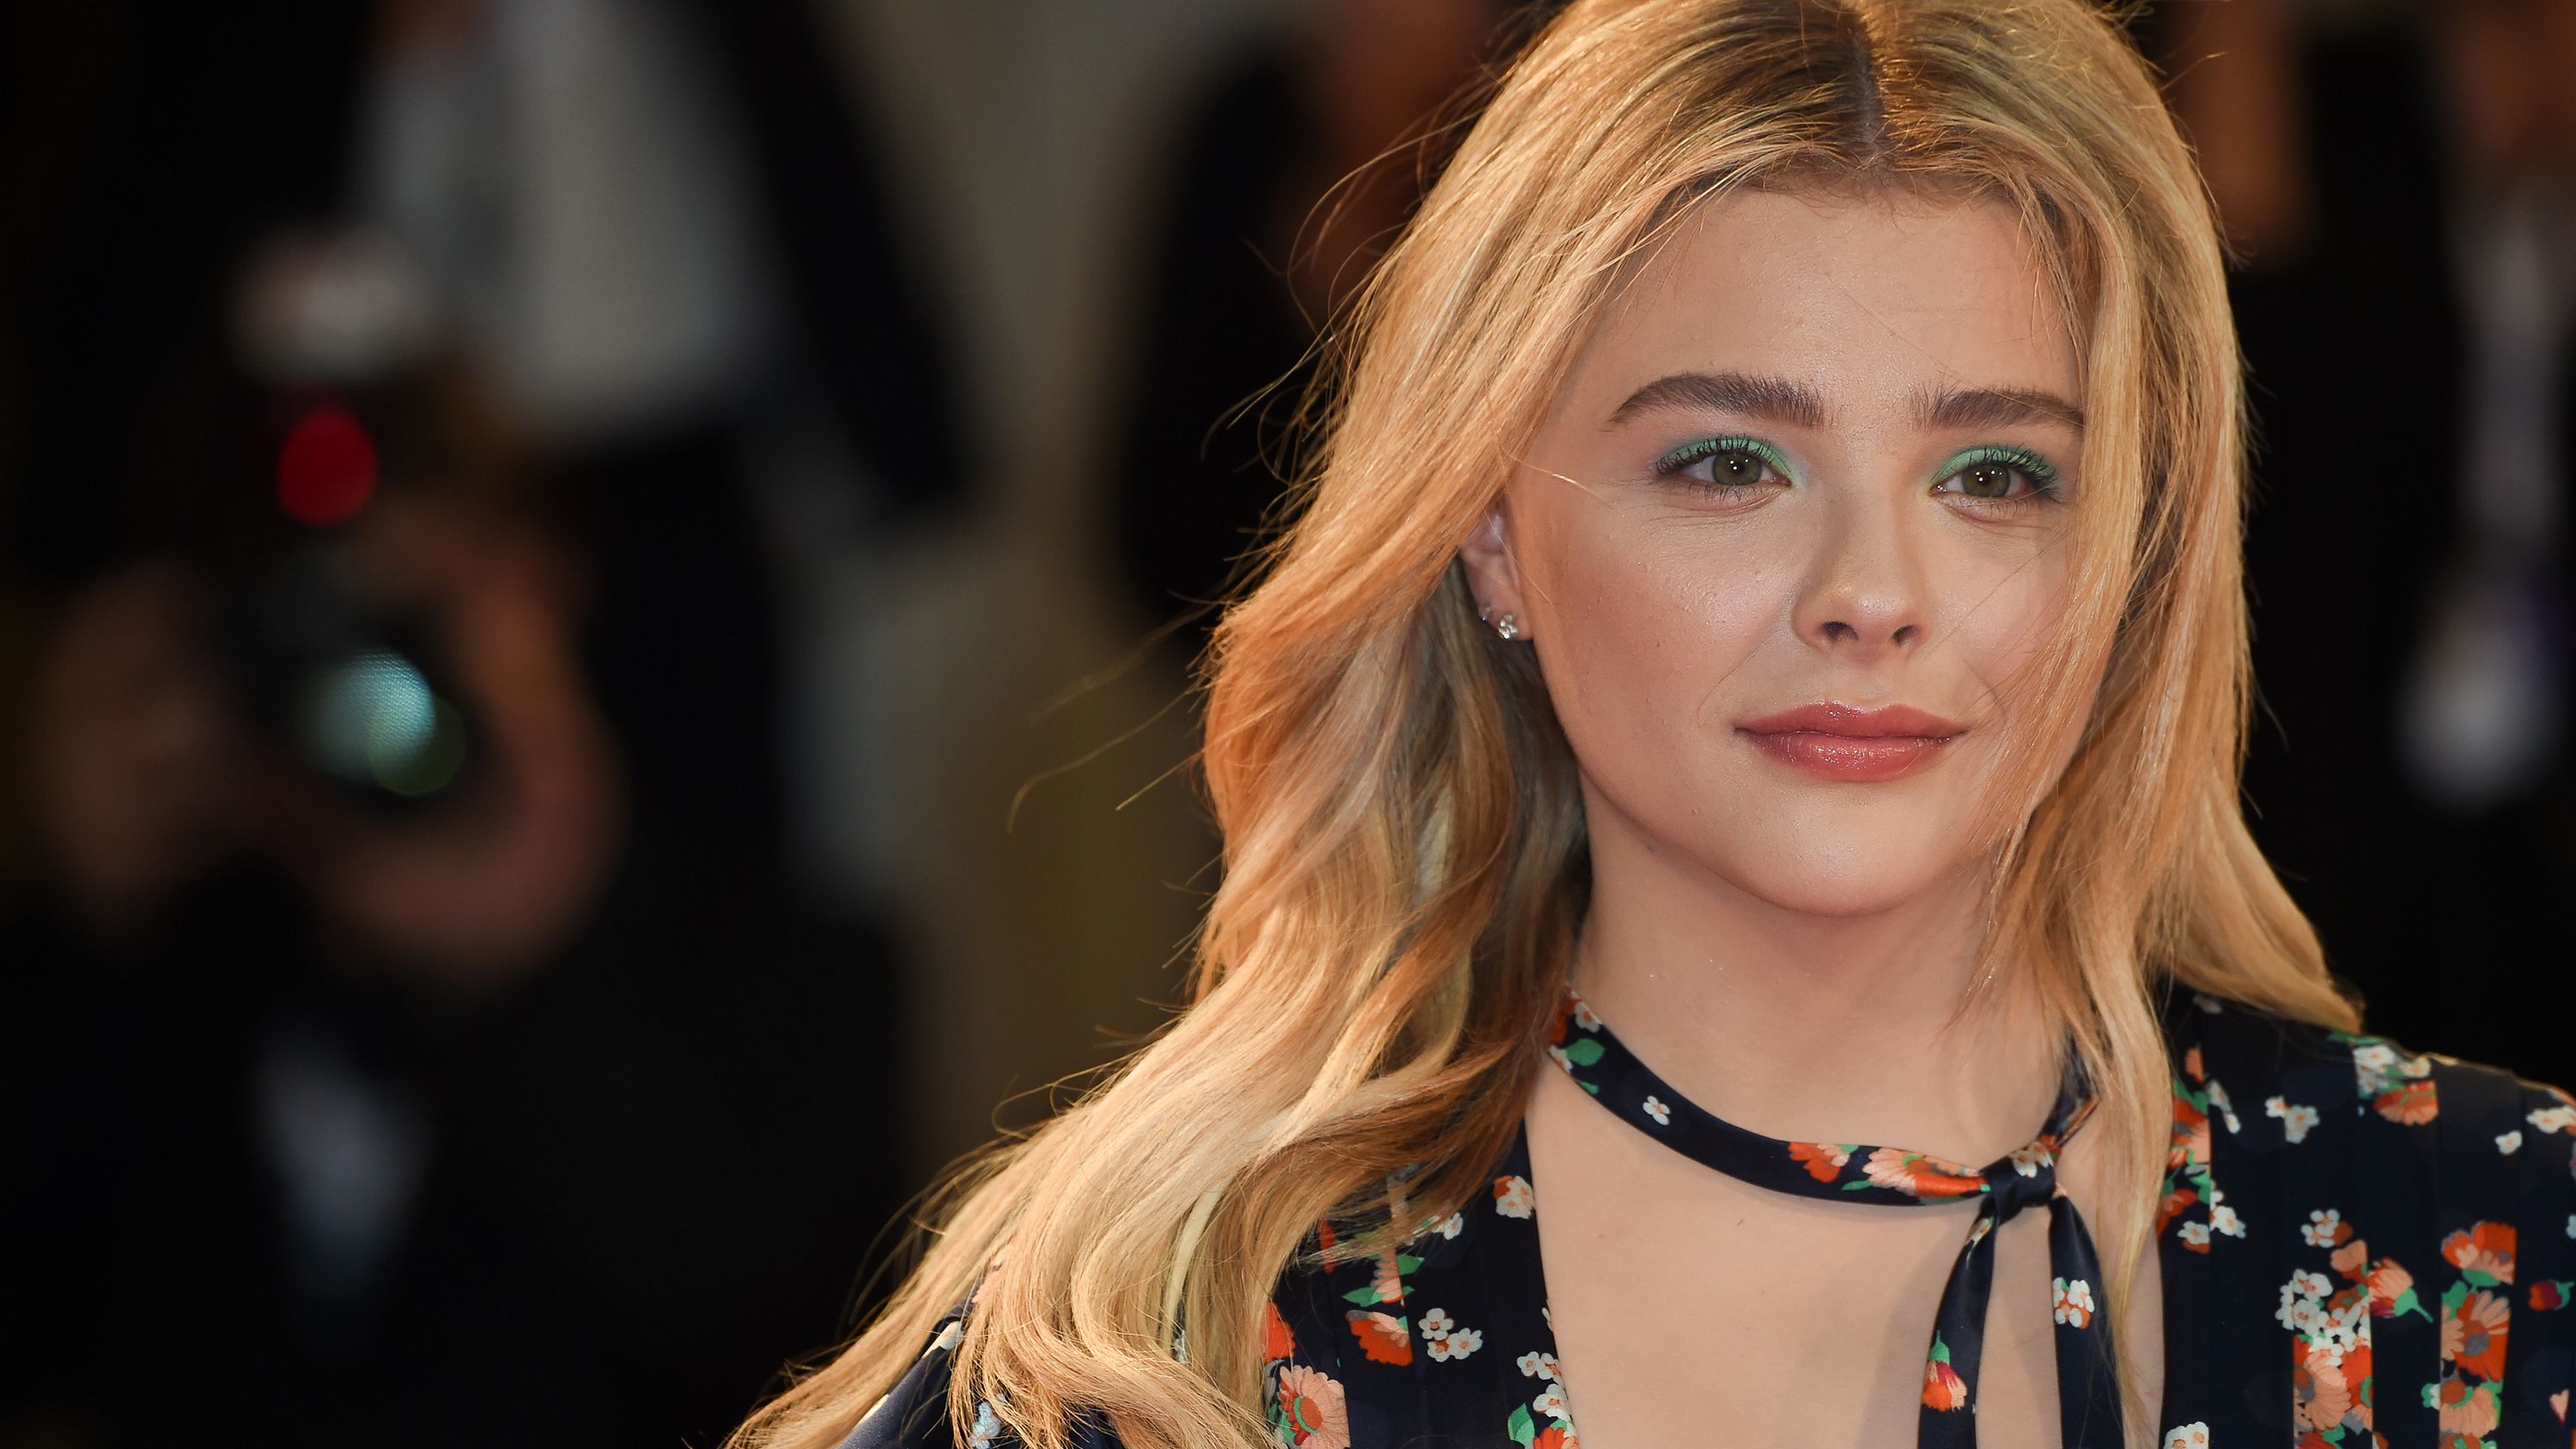 Chloë Moretz speaks out about the pressures of body image in Hollywood